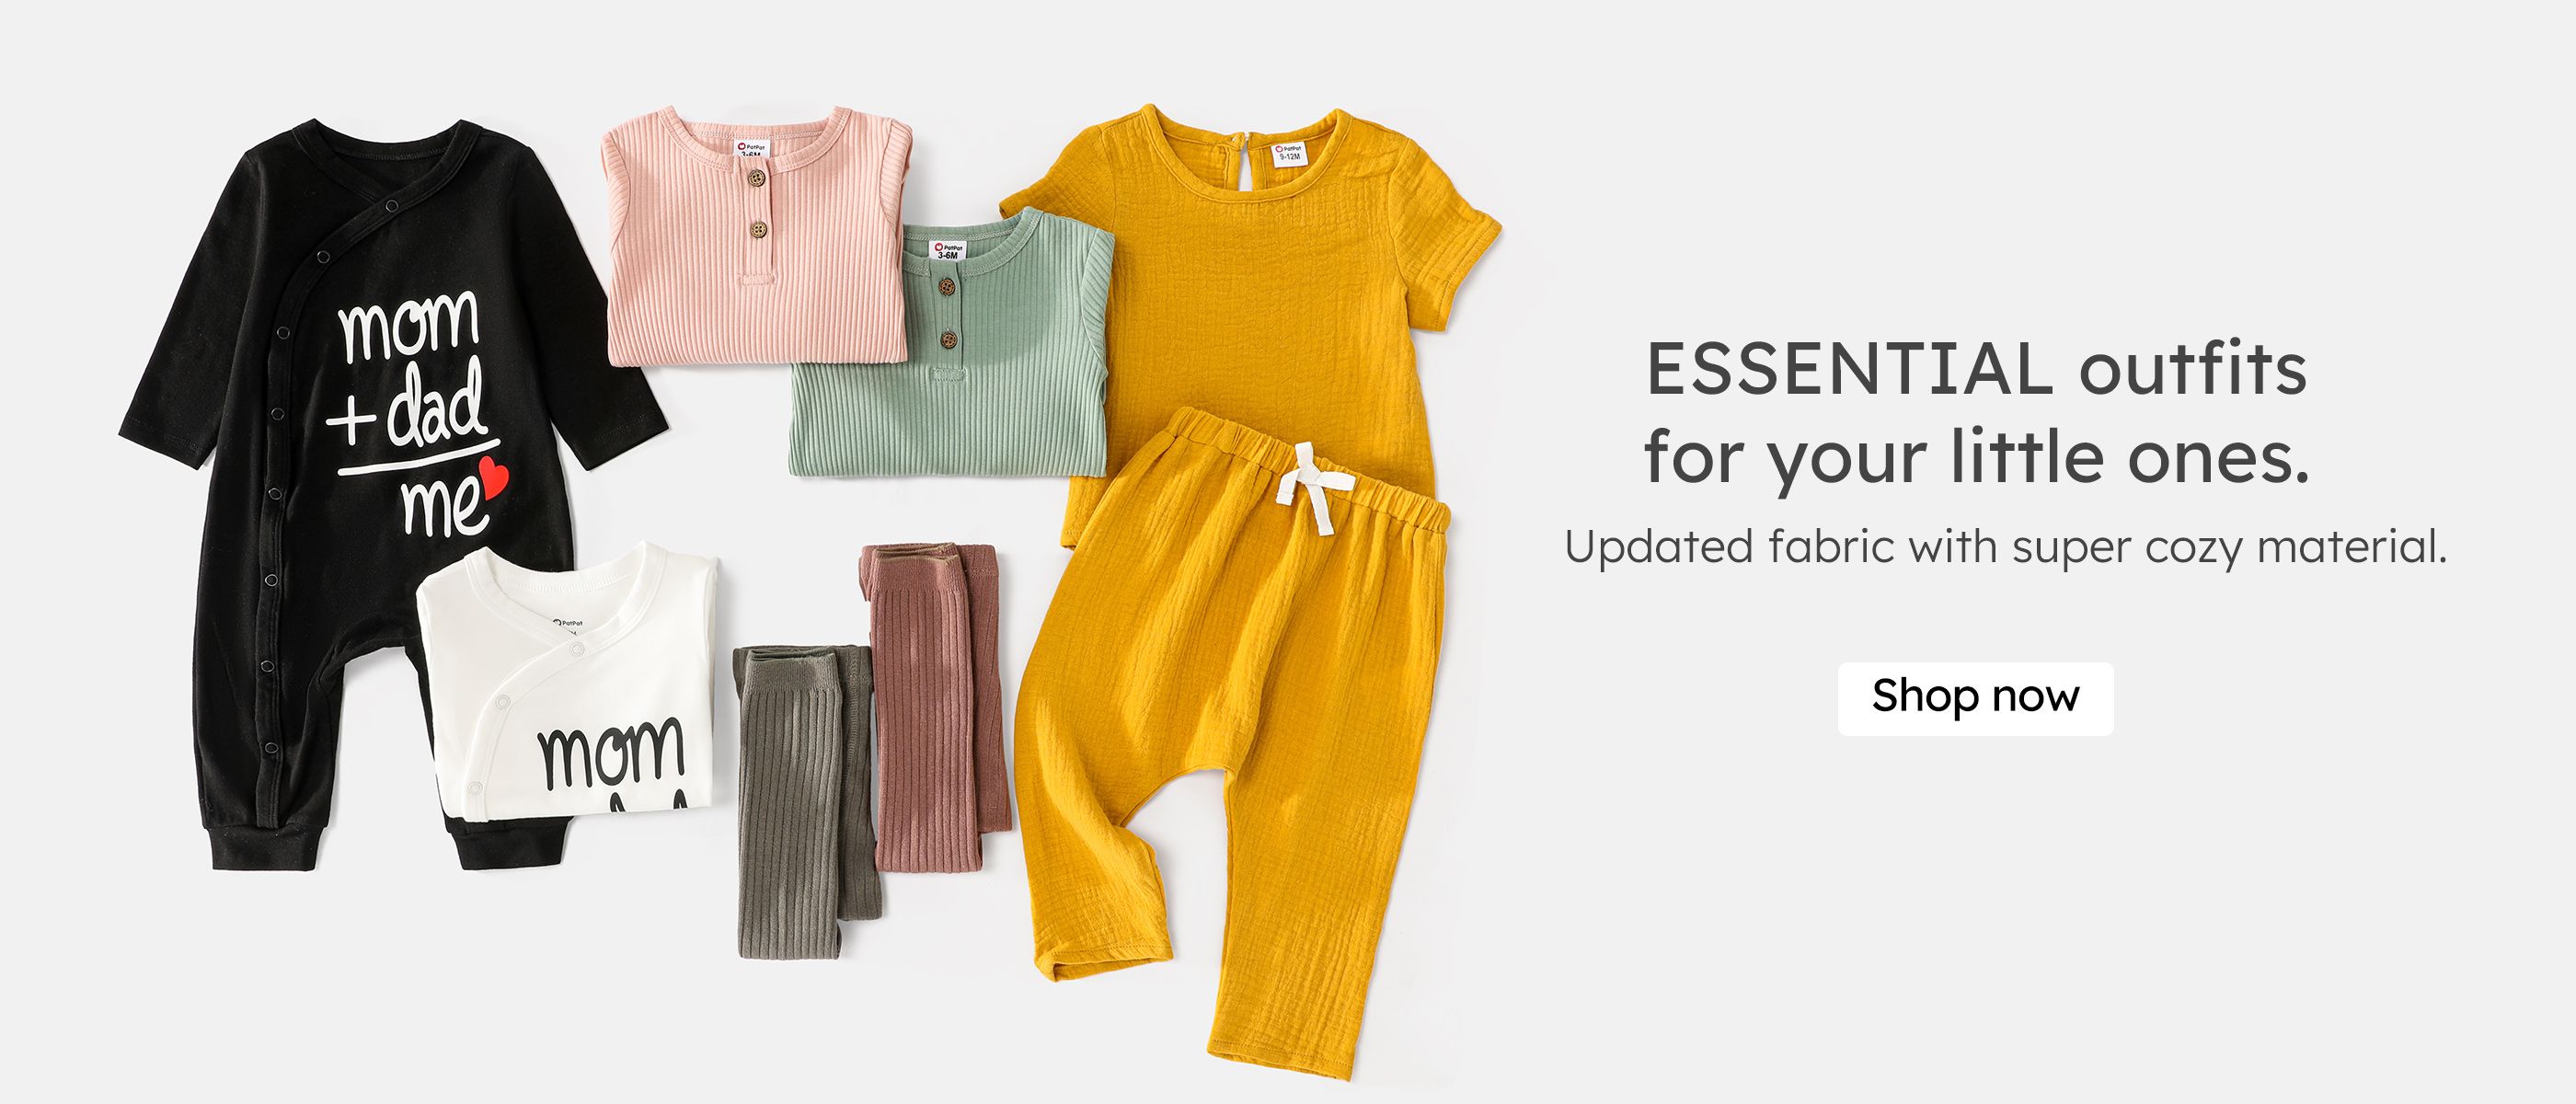 Click it to join Essential Outfits activity